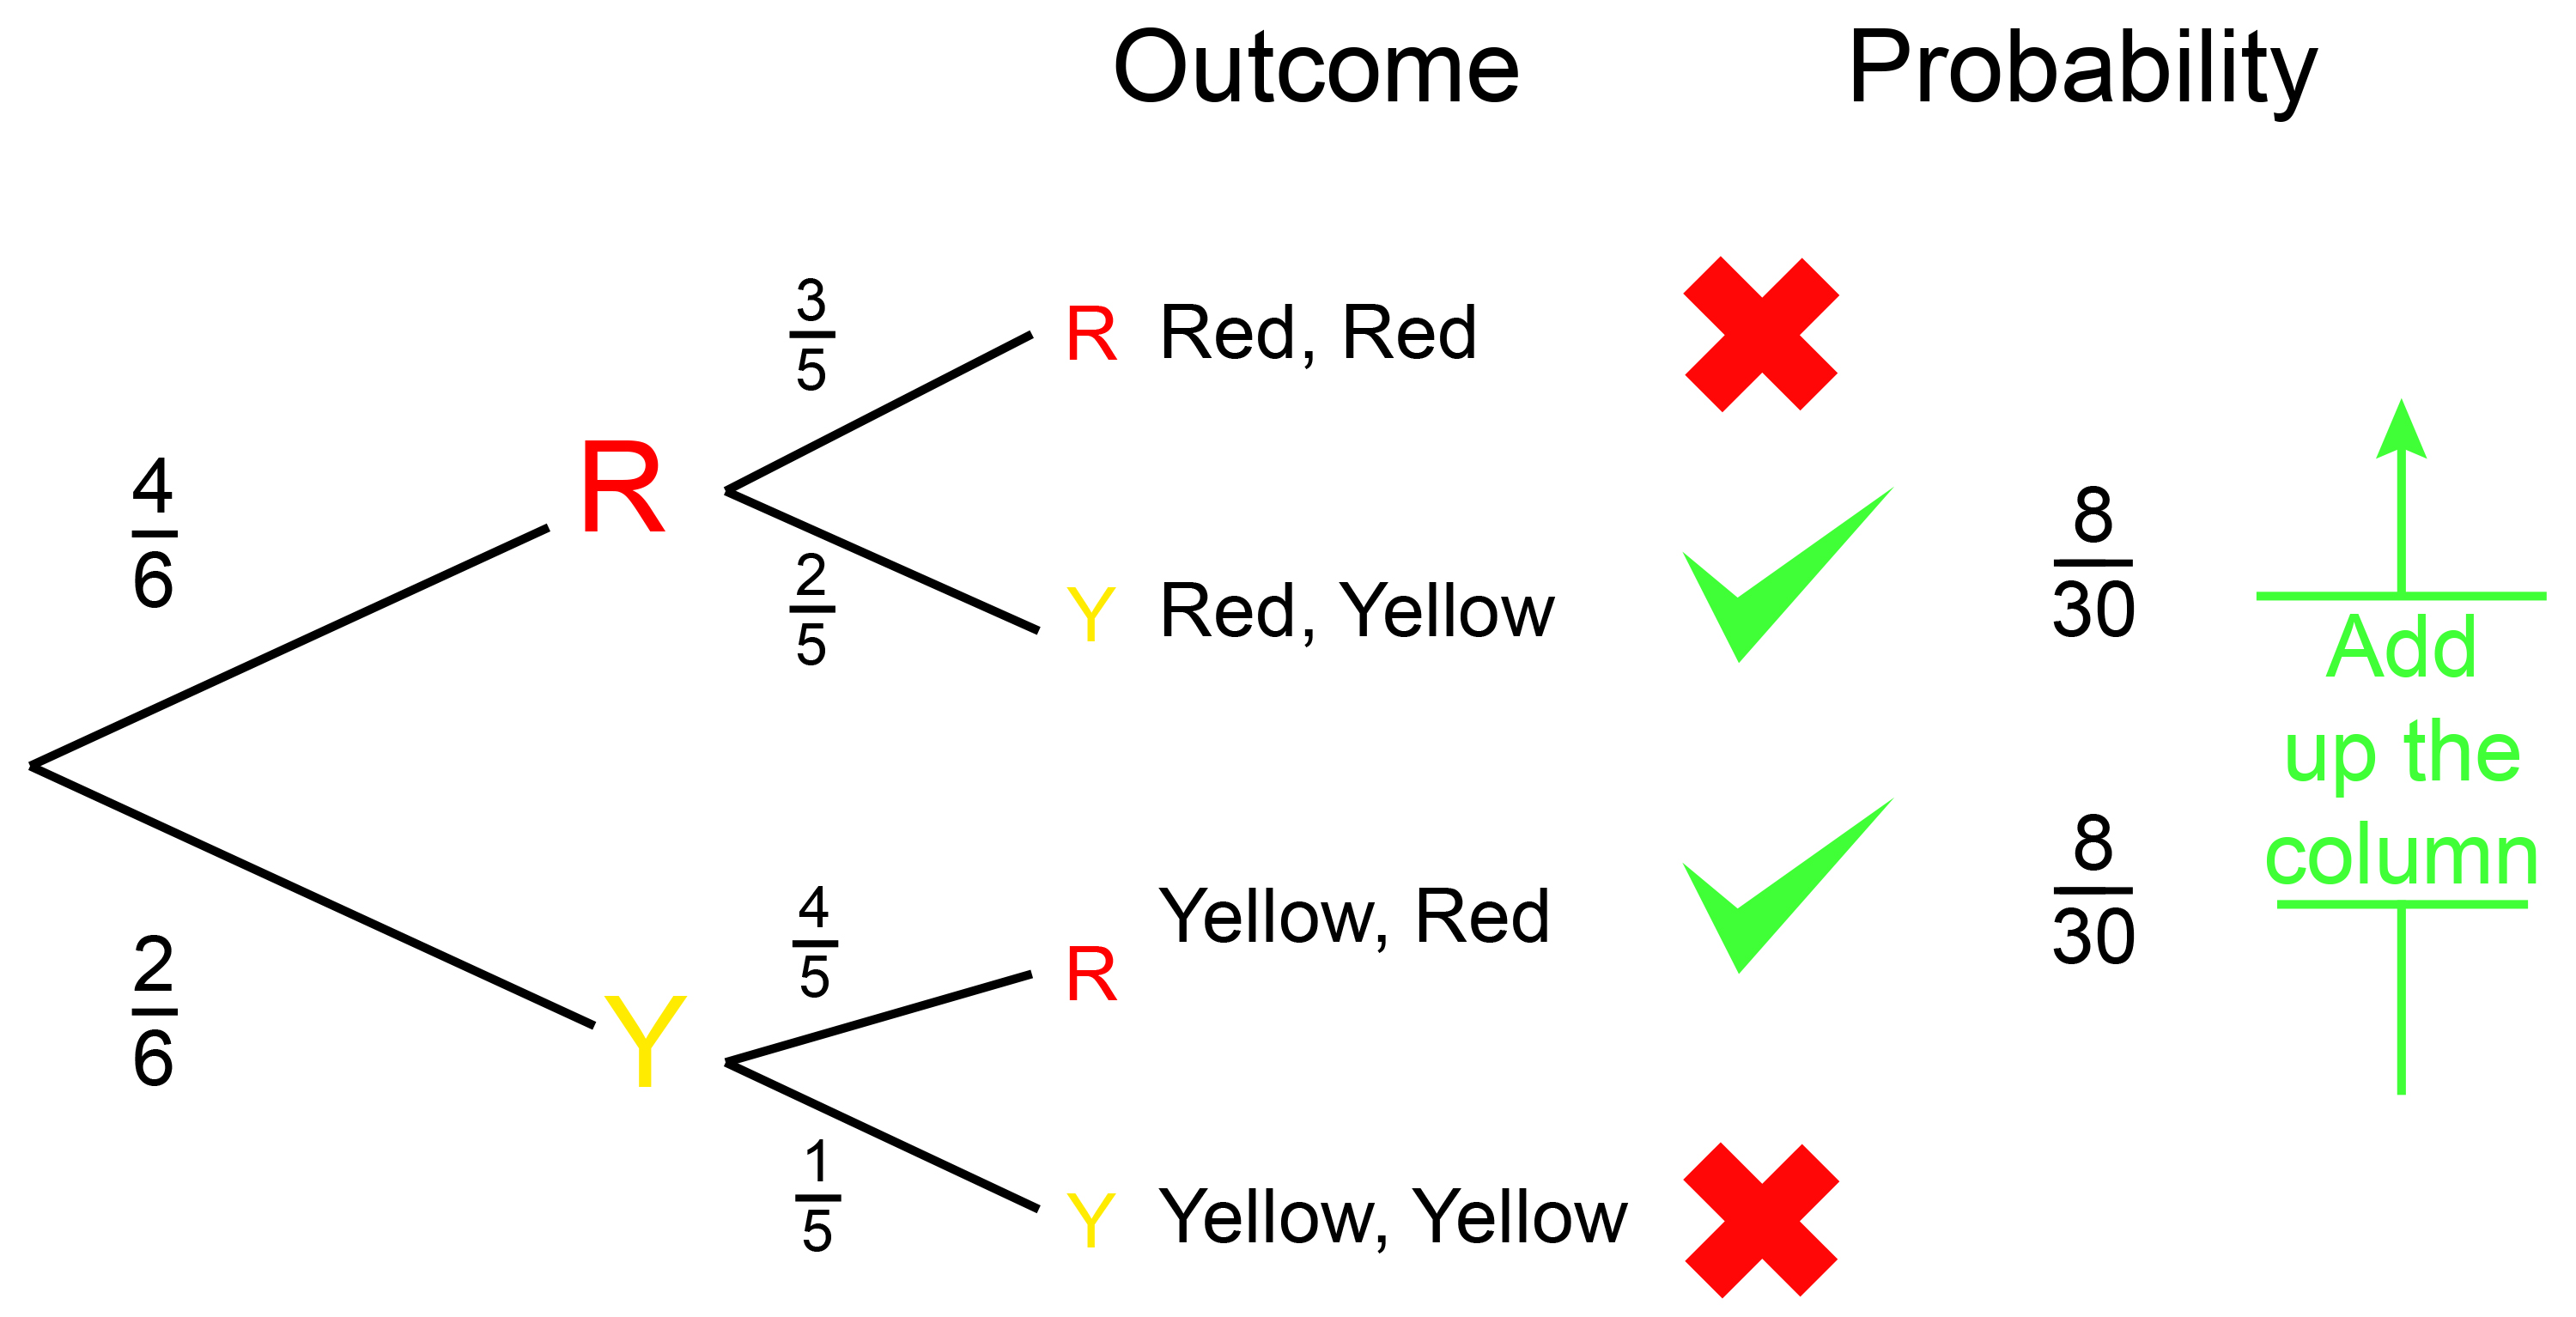 The probability is red and yellow or yellow and red